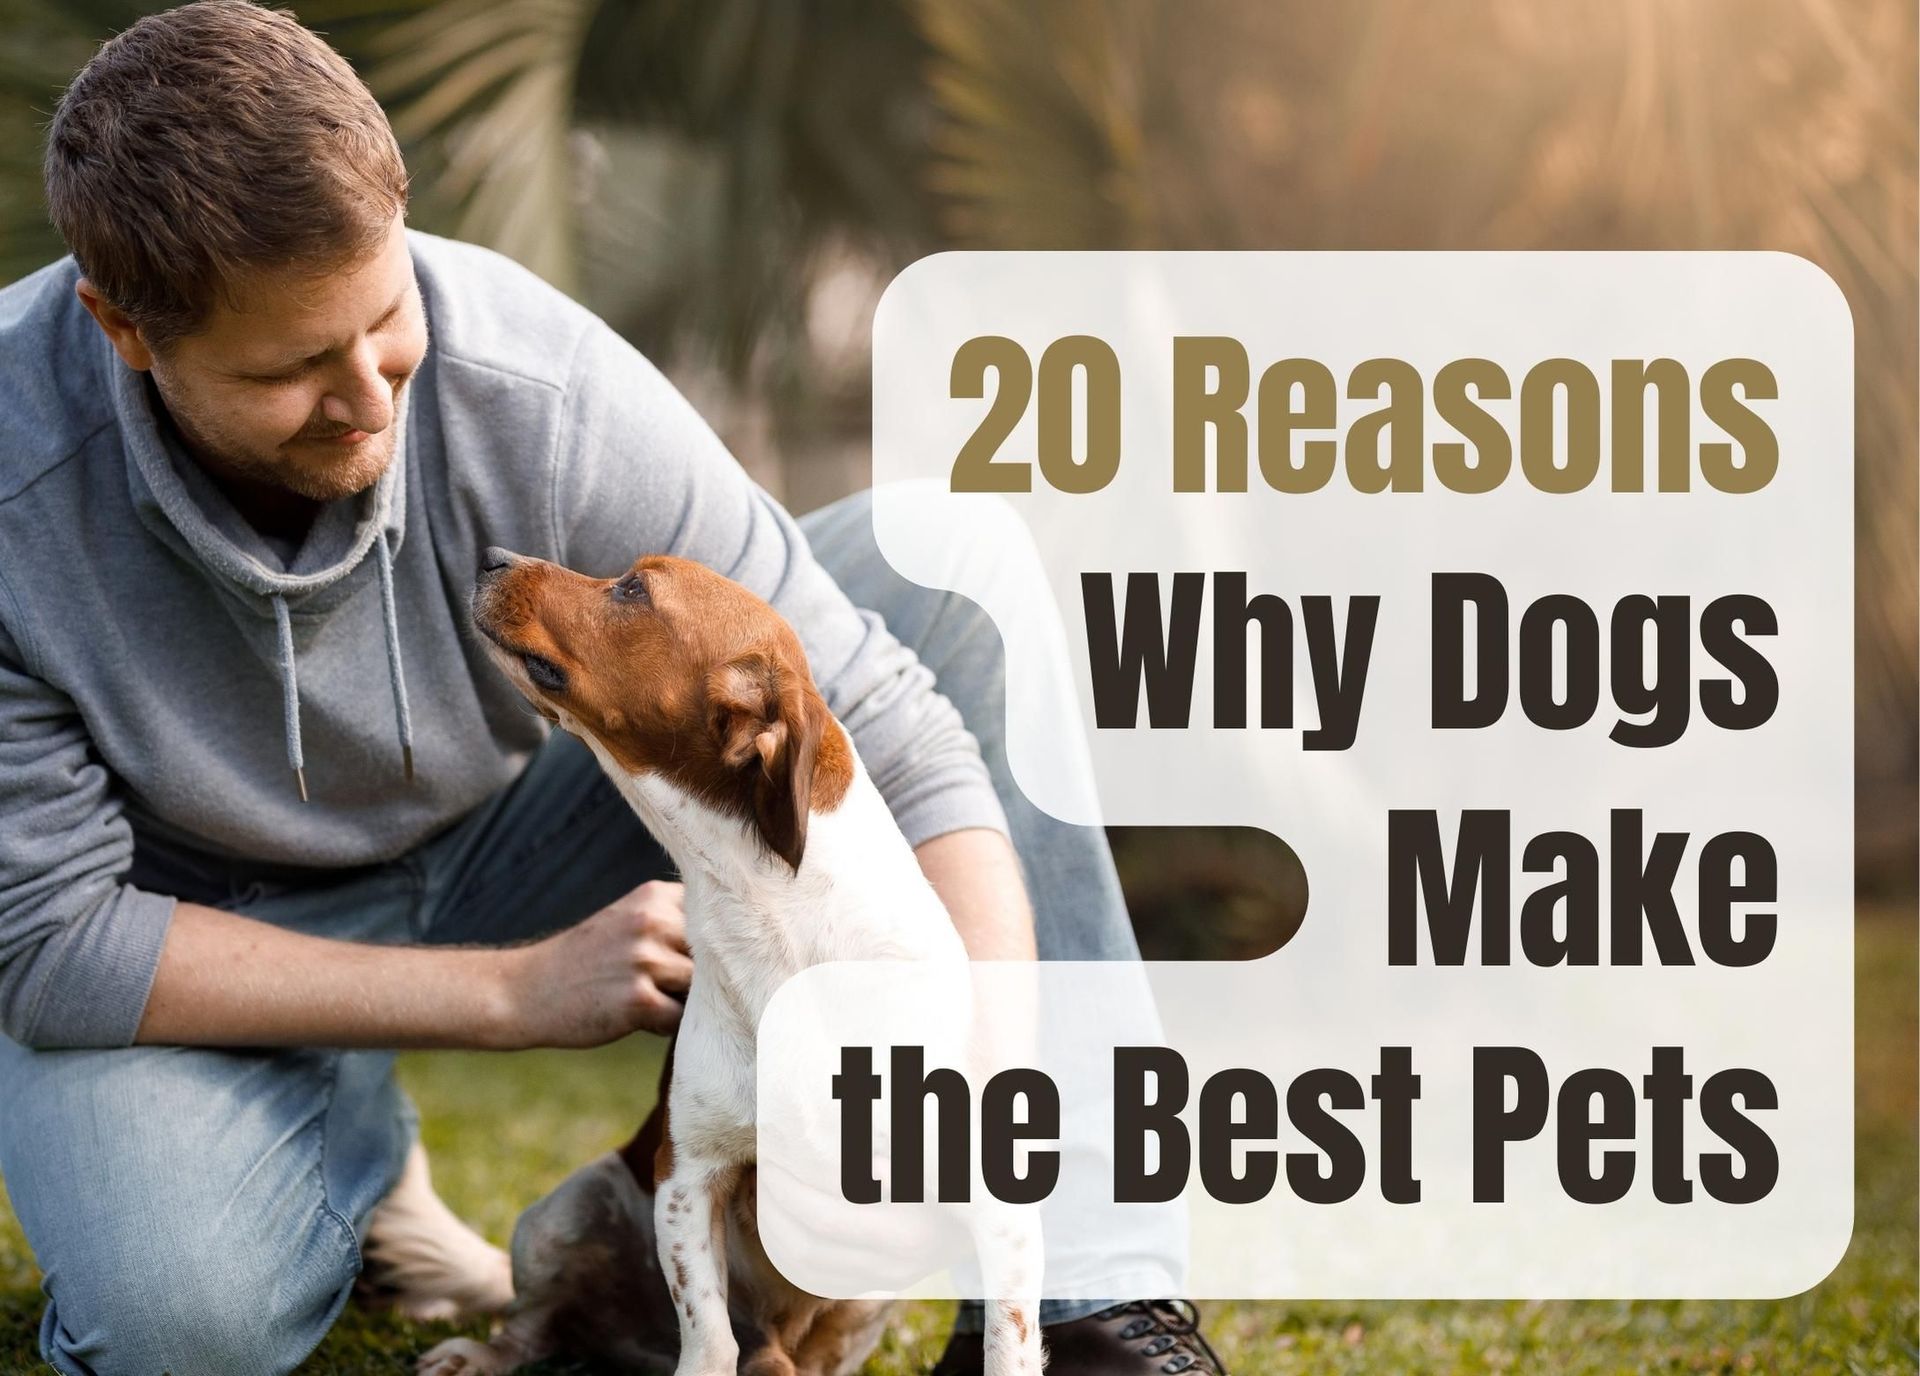 what dogs make good pets